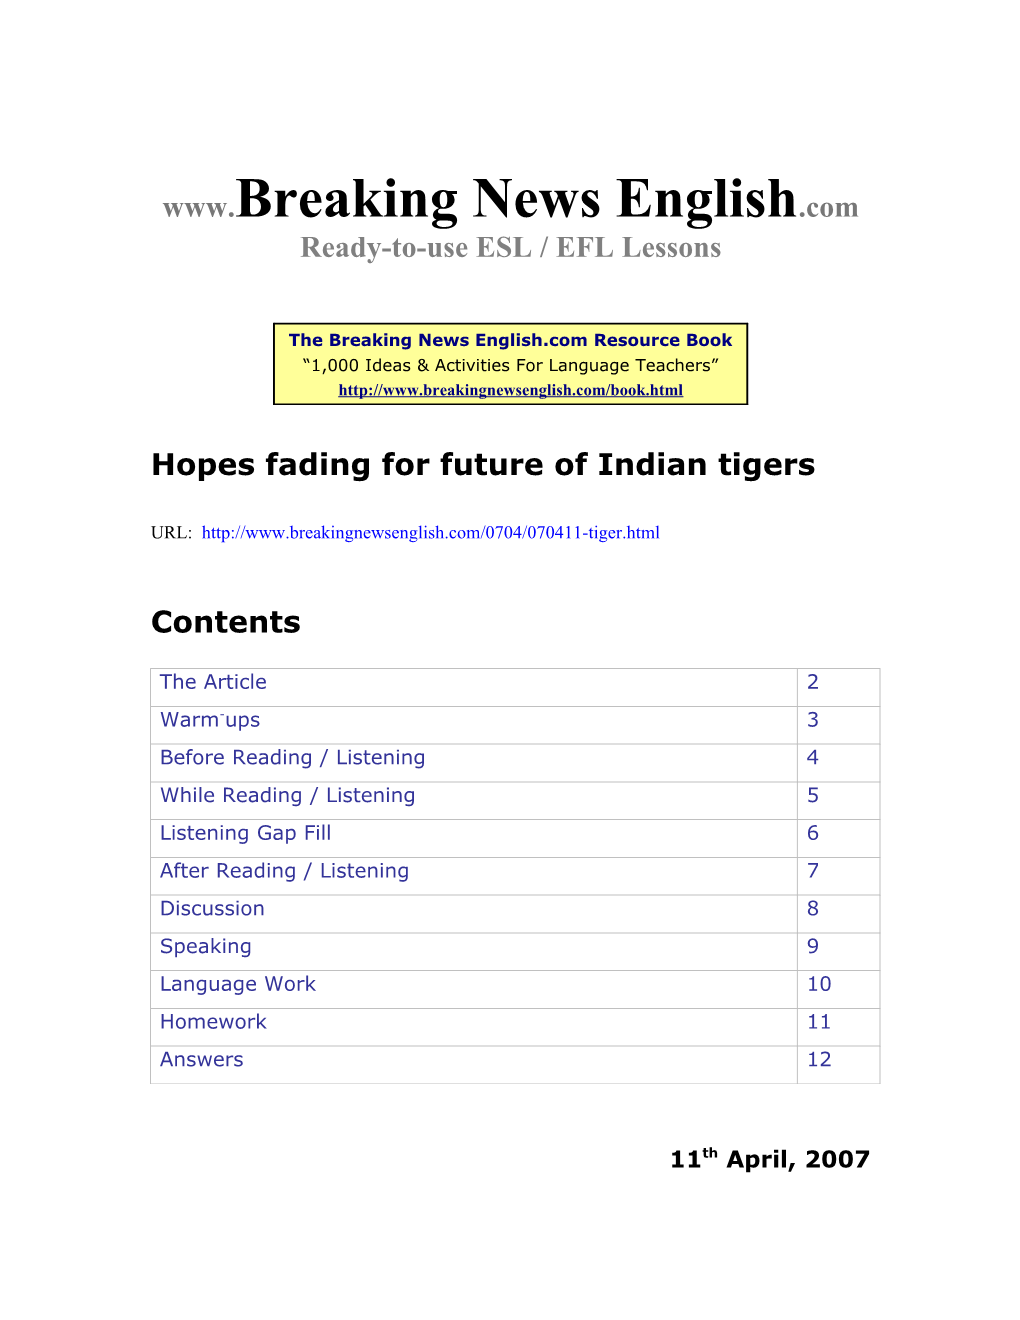 Hopes Fading for Future of Indian Tigers